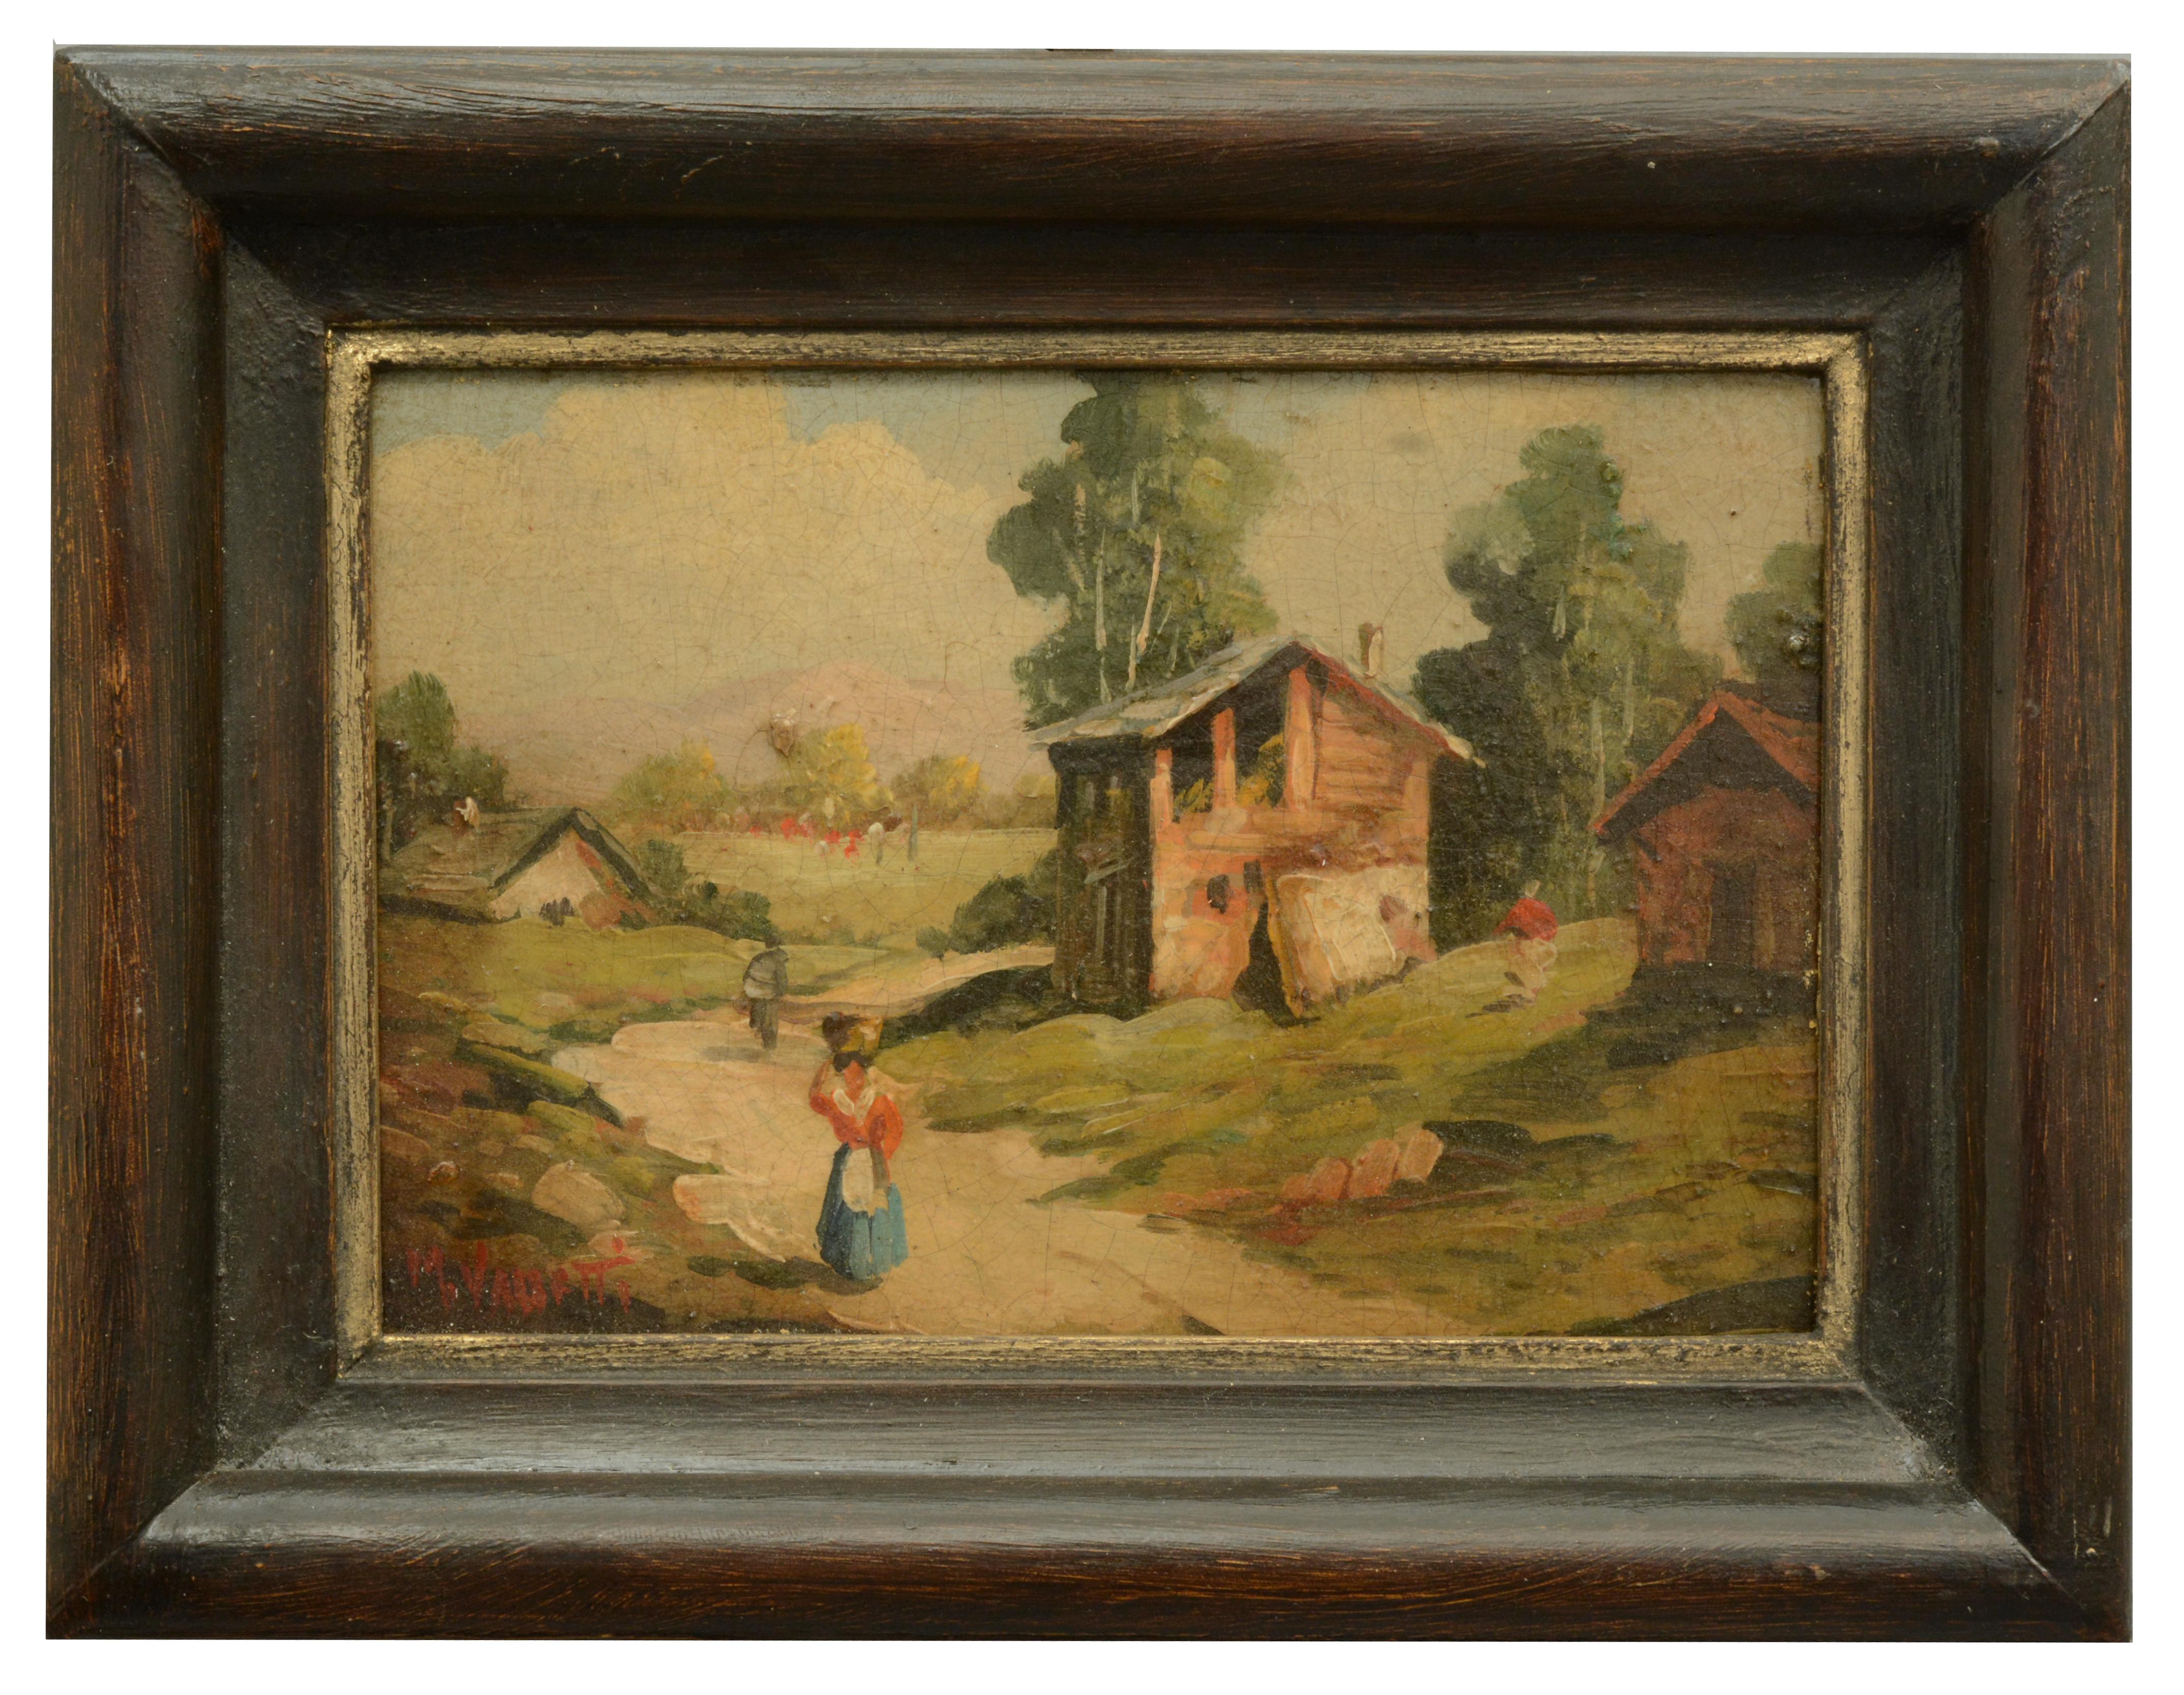 COUNTRY SCENE - Italian Oil on Board Painting